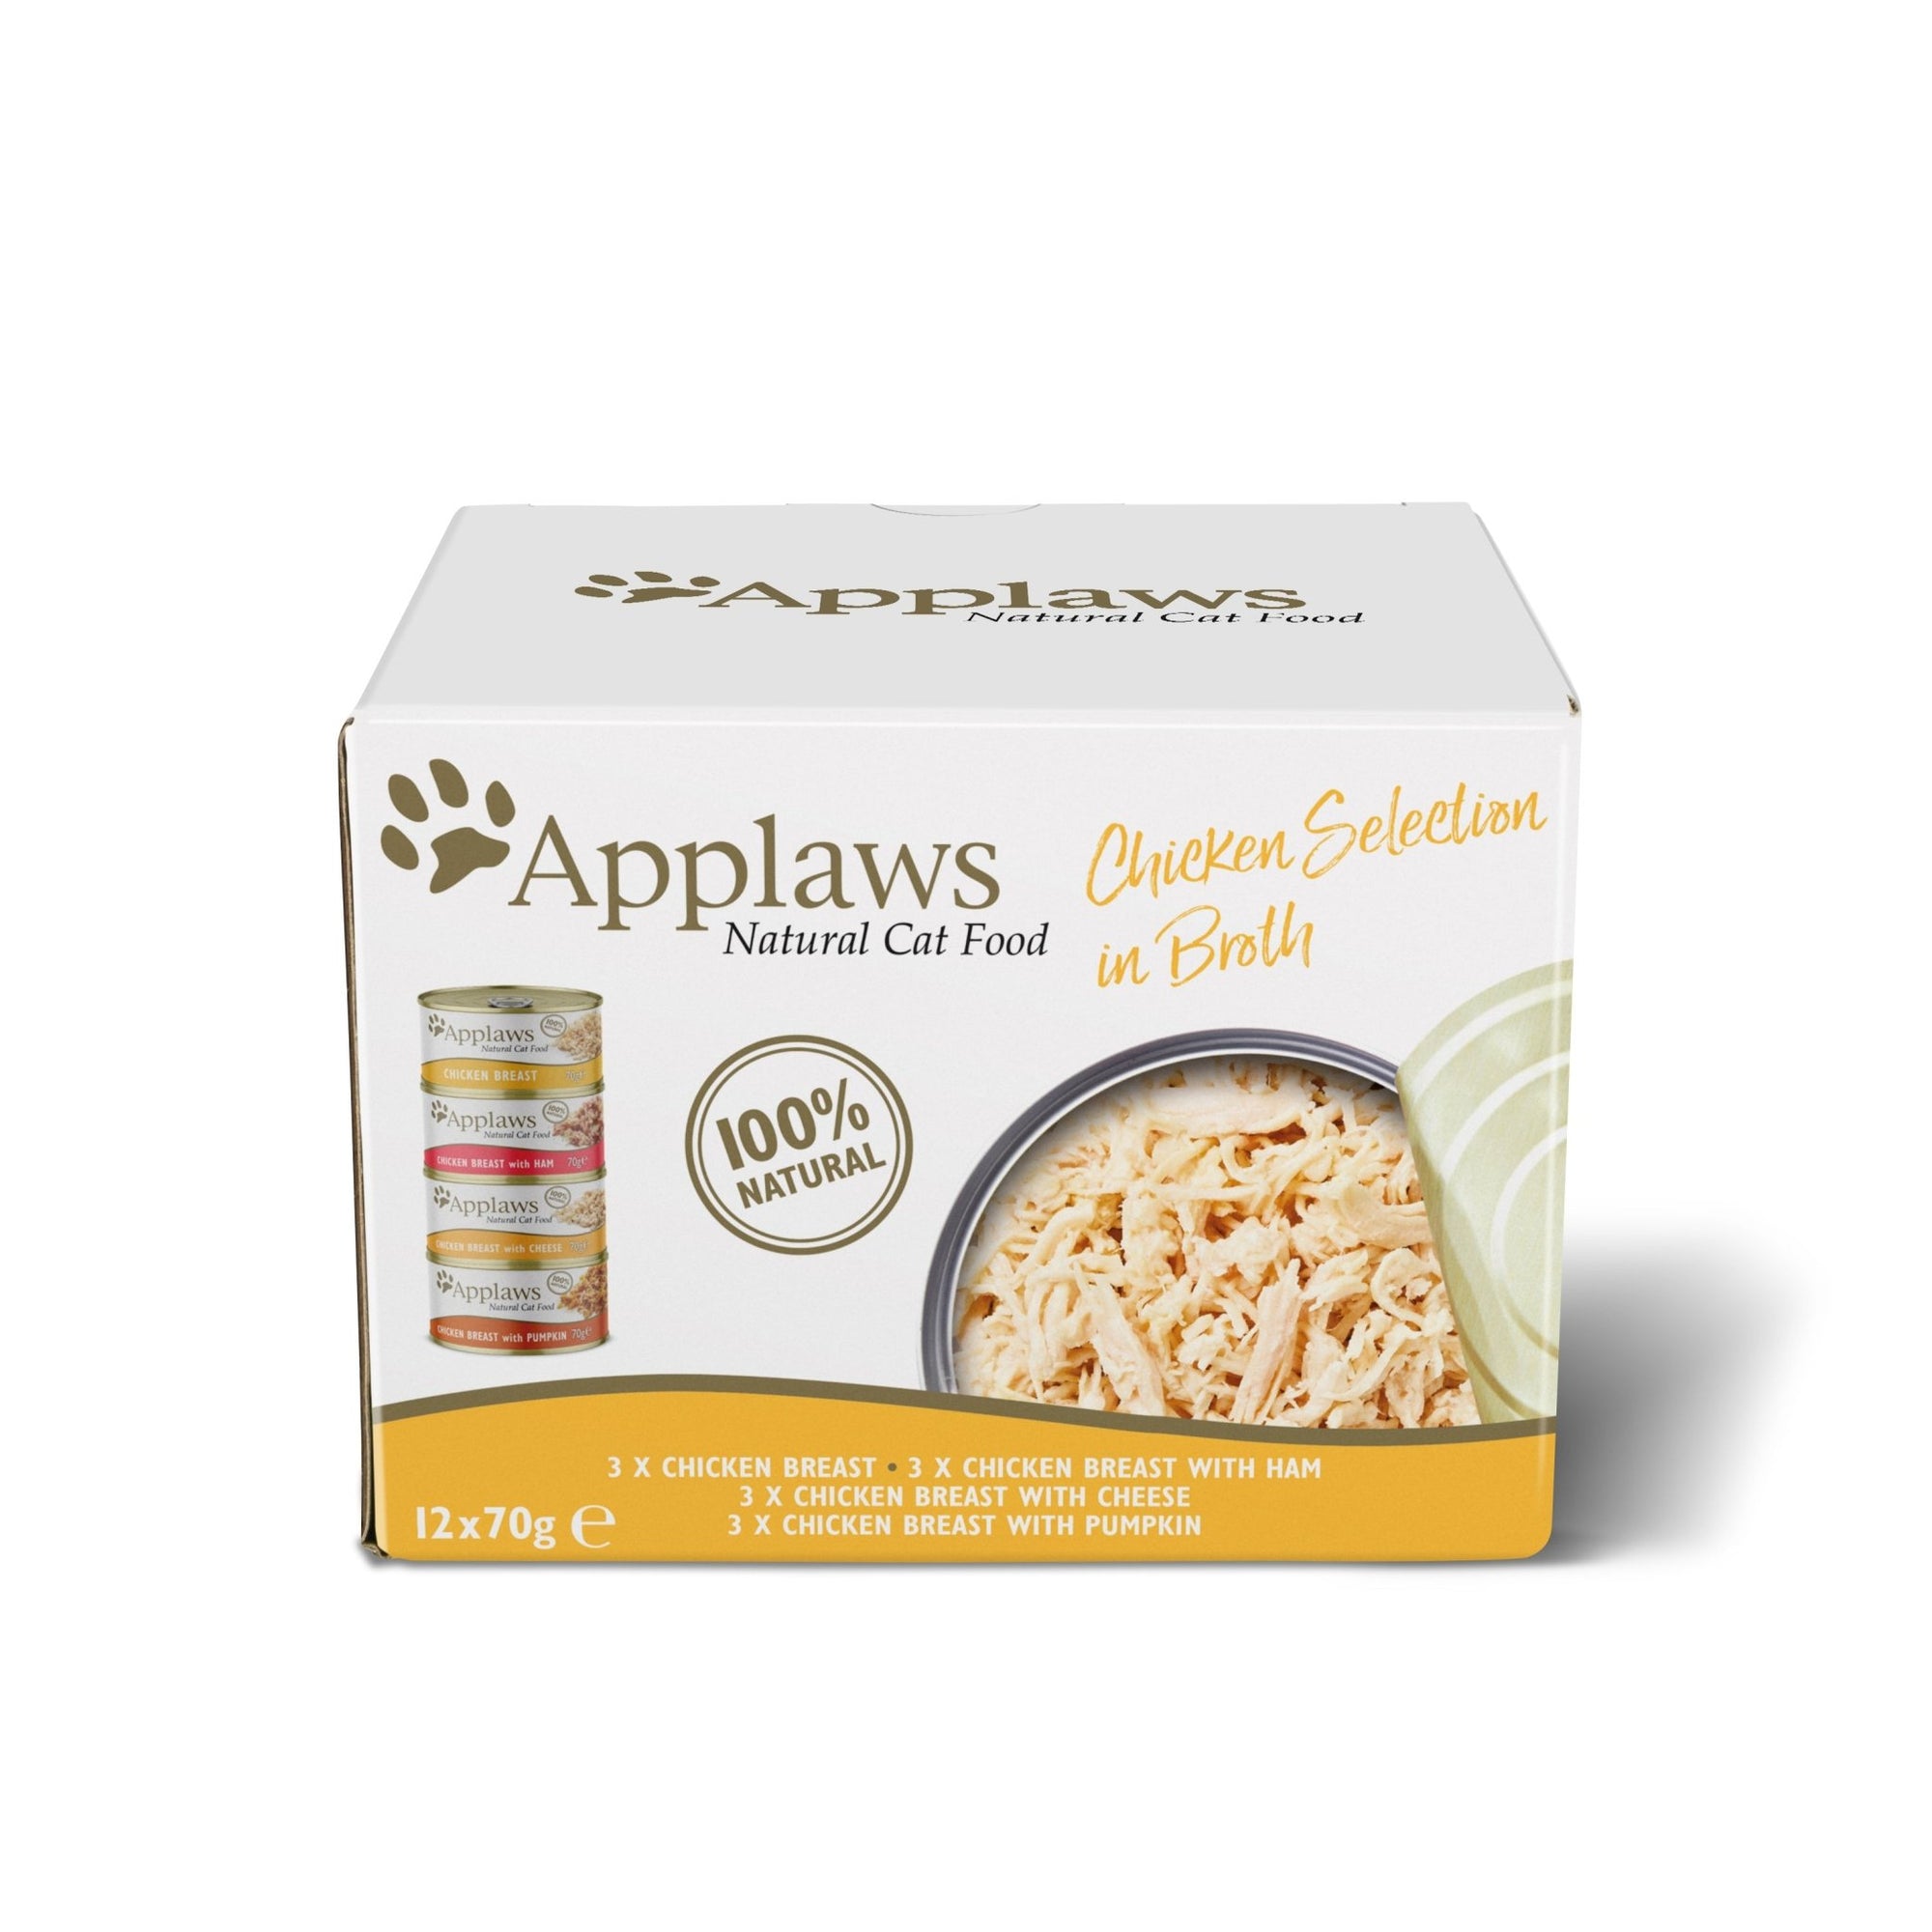 Applaws Cat Chicken Selection in Broth Tins 4x (12x70g), Applaws,